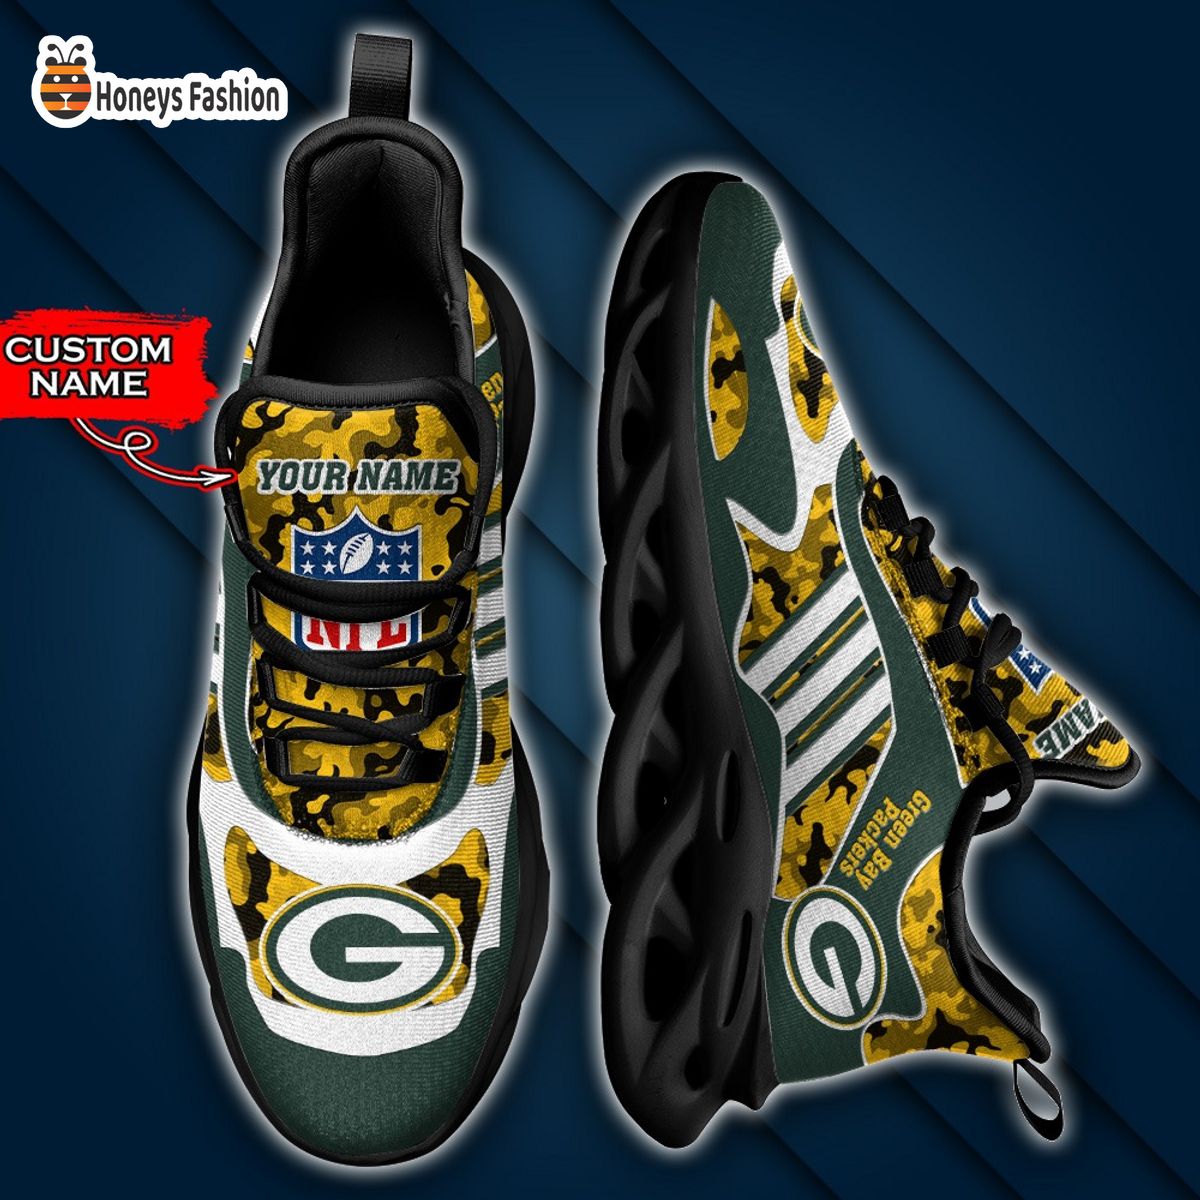 Green Bay Packers NFL Adidas Personalized Max Soul Shoes